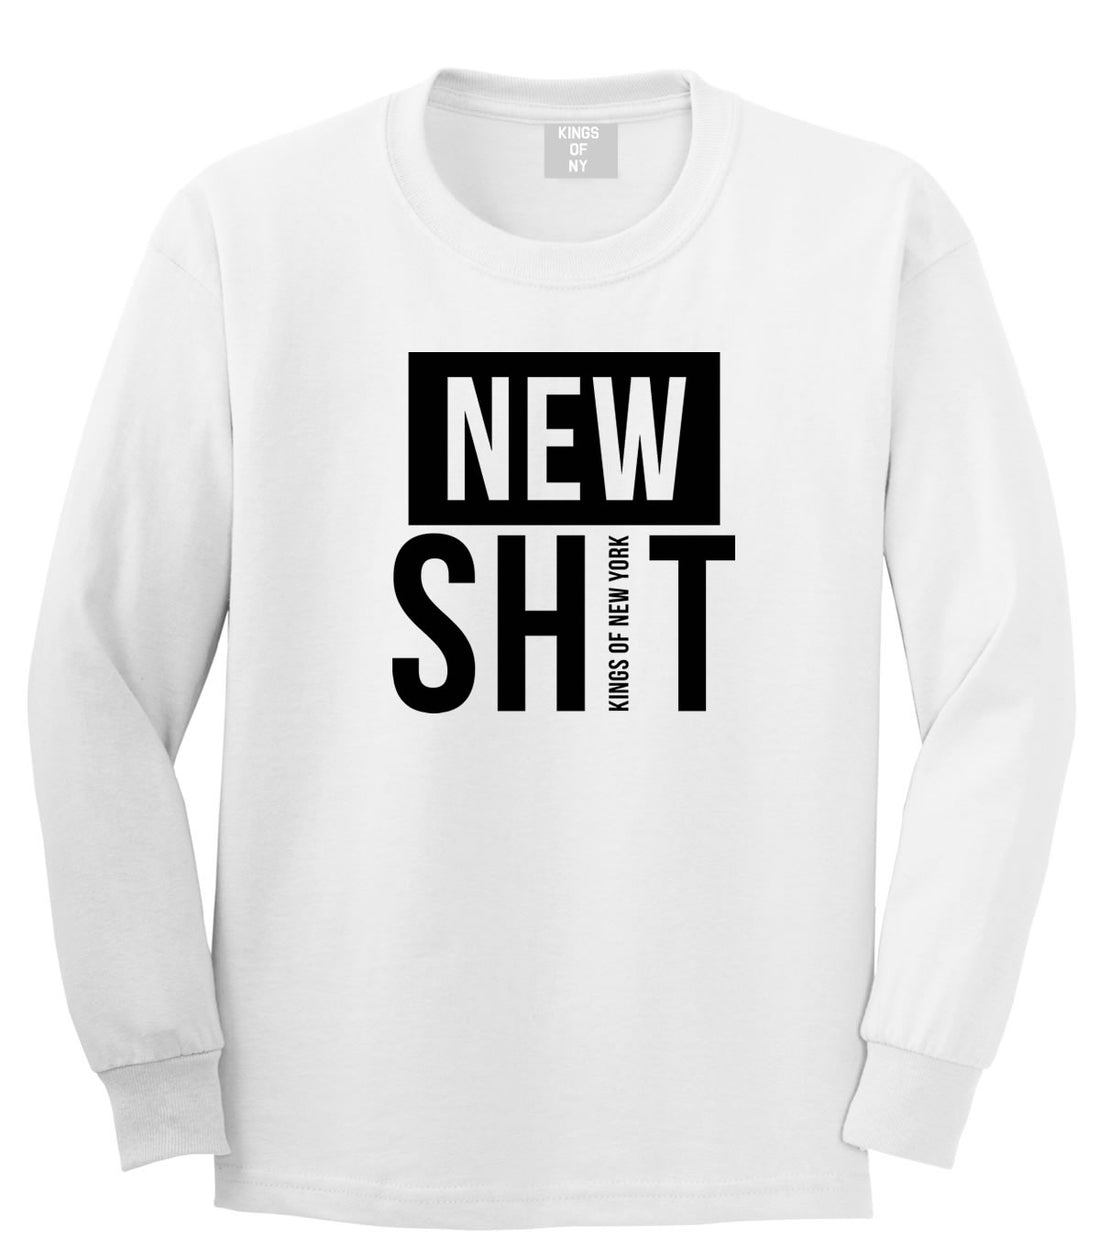 New Shit Long Sleeve T-Shirt in White by Kings Of NY